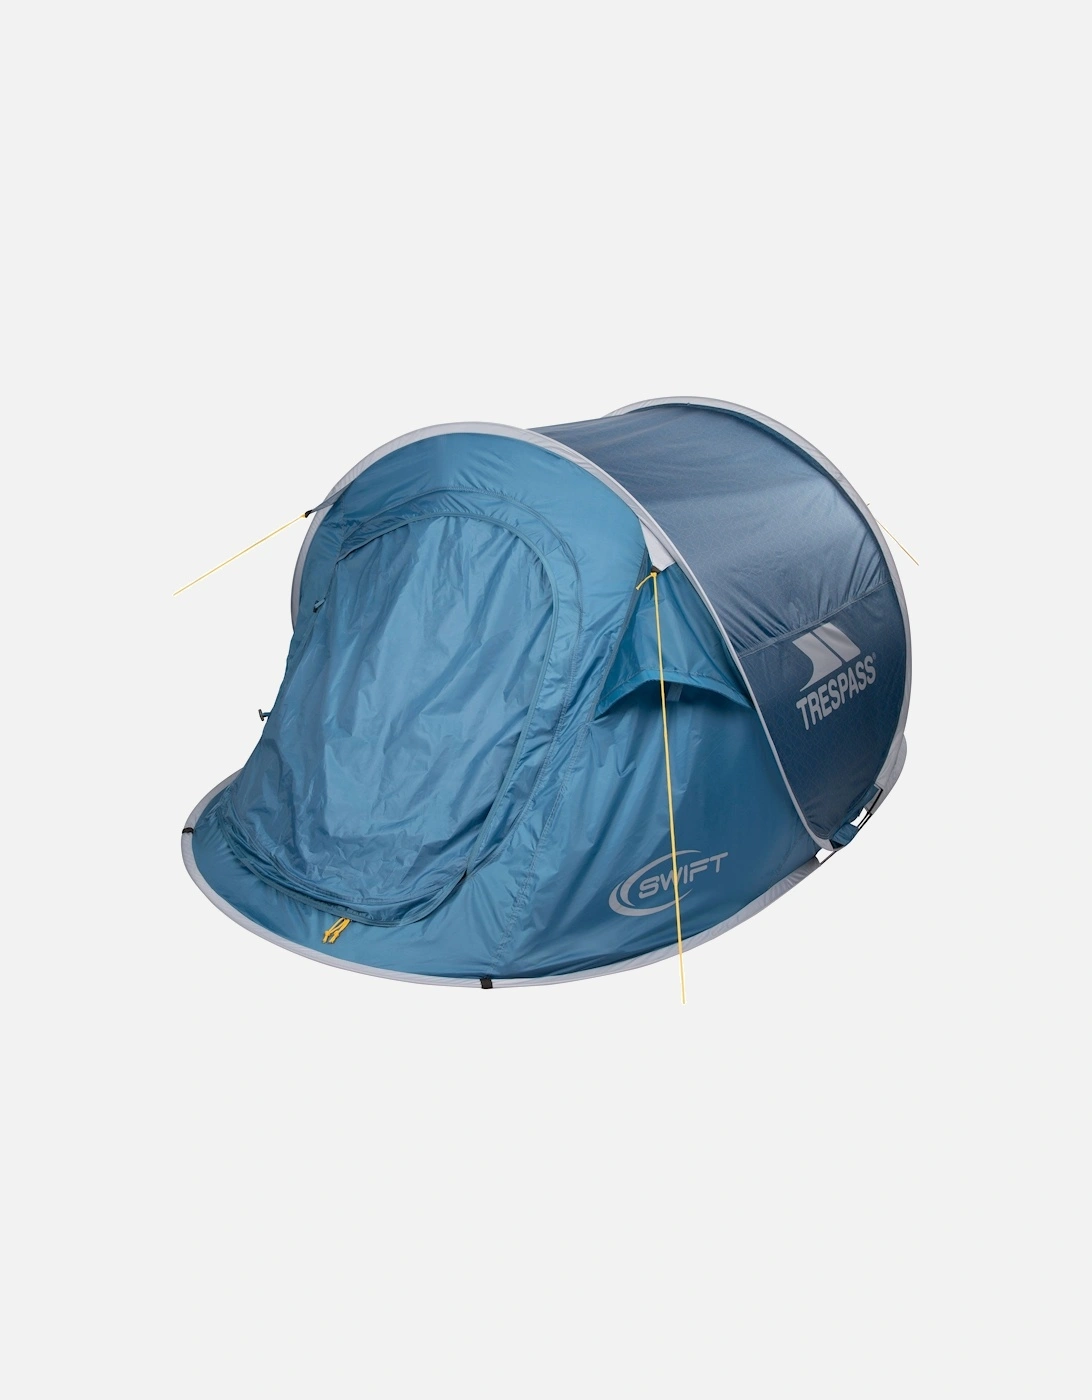 Swift 2 Patterned Pop-Up Tent, 4 of 3